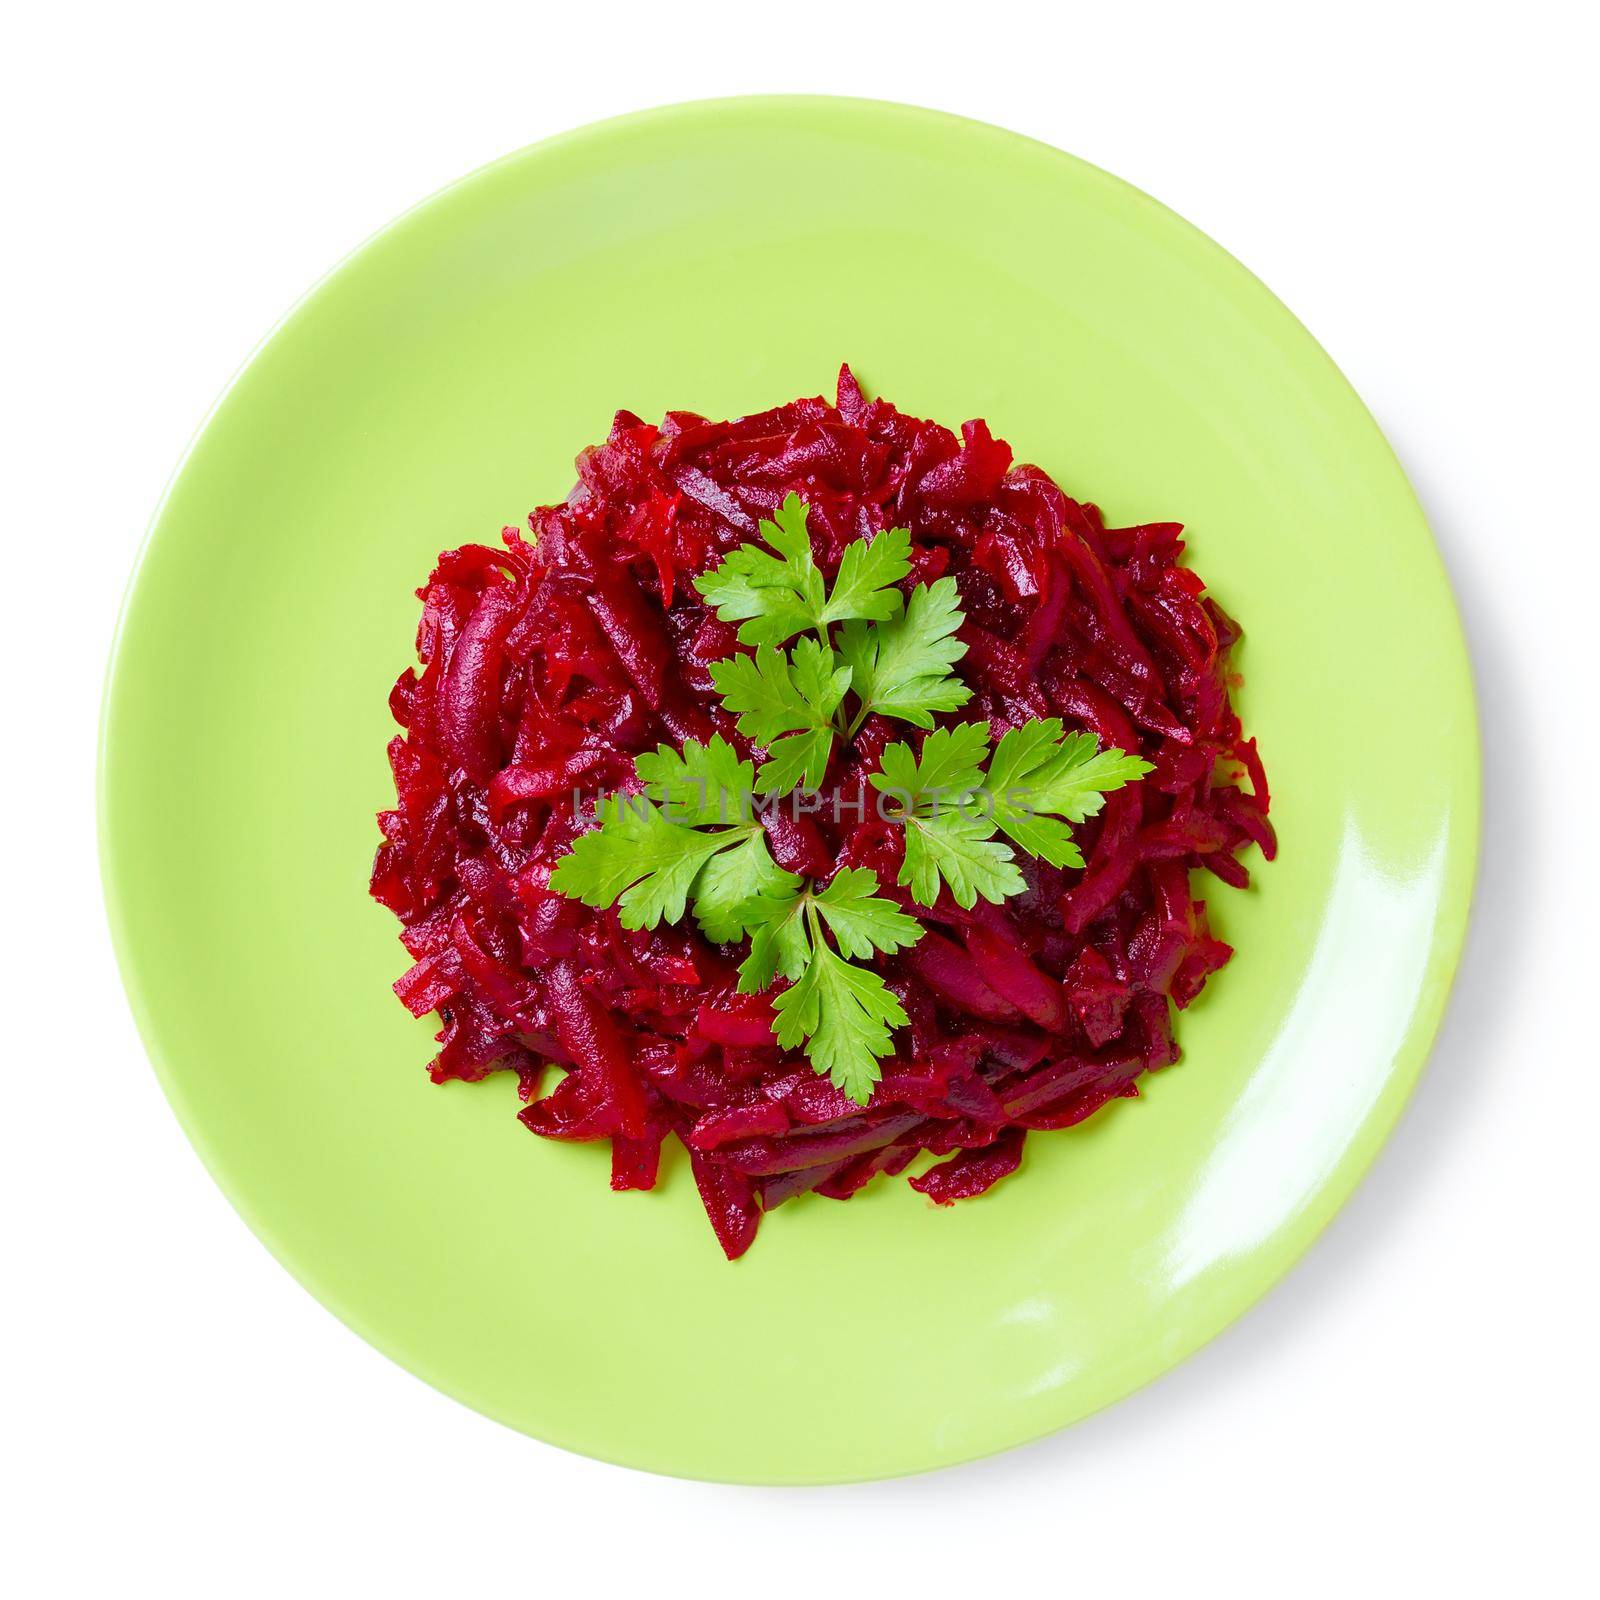 Beet salad on a green plate, top view.